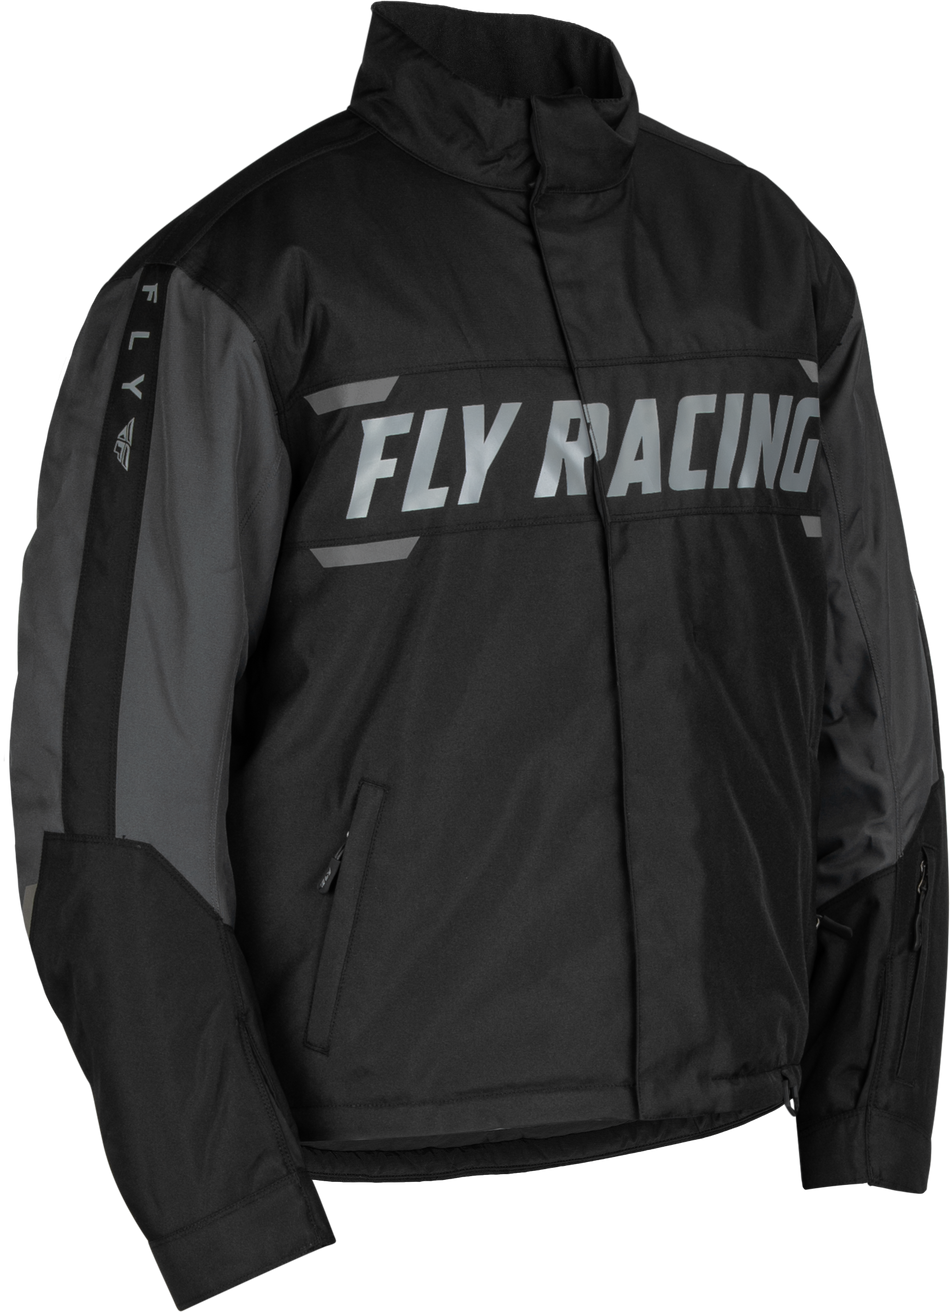 FLY RACING Outpost Jacket Black/Grey 4x 470-55004X